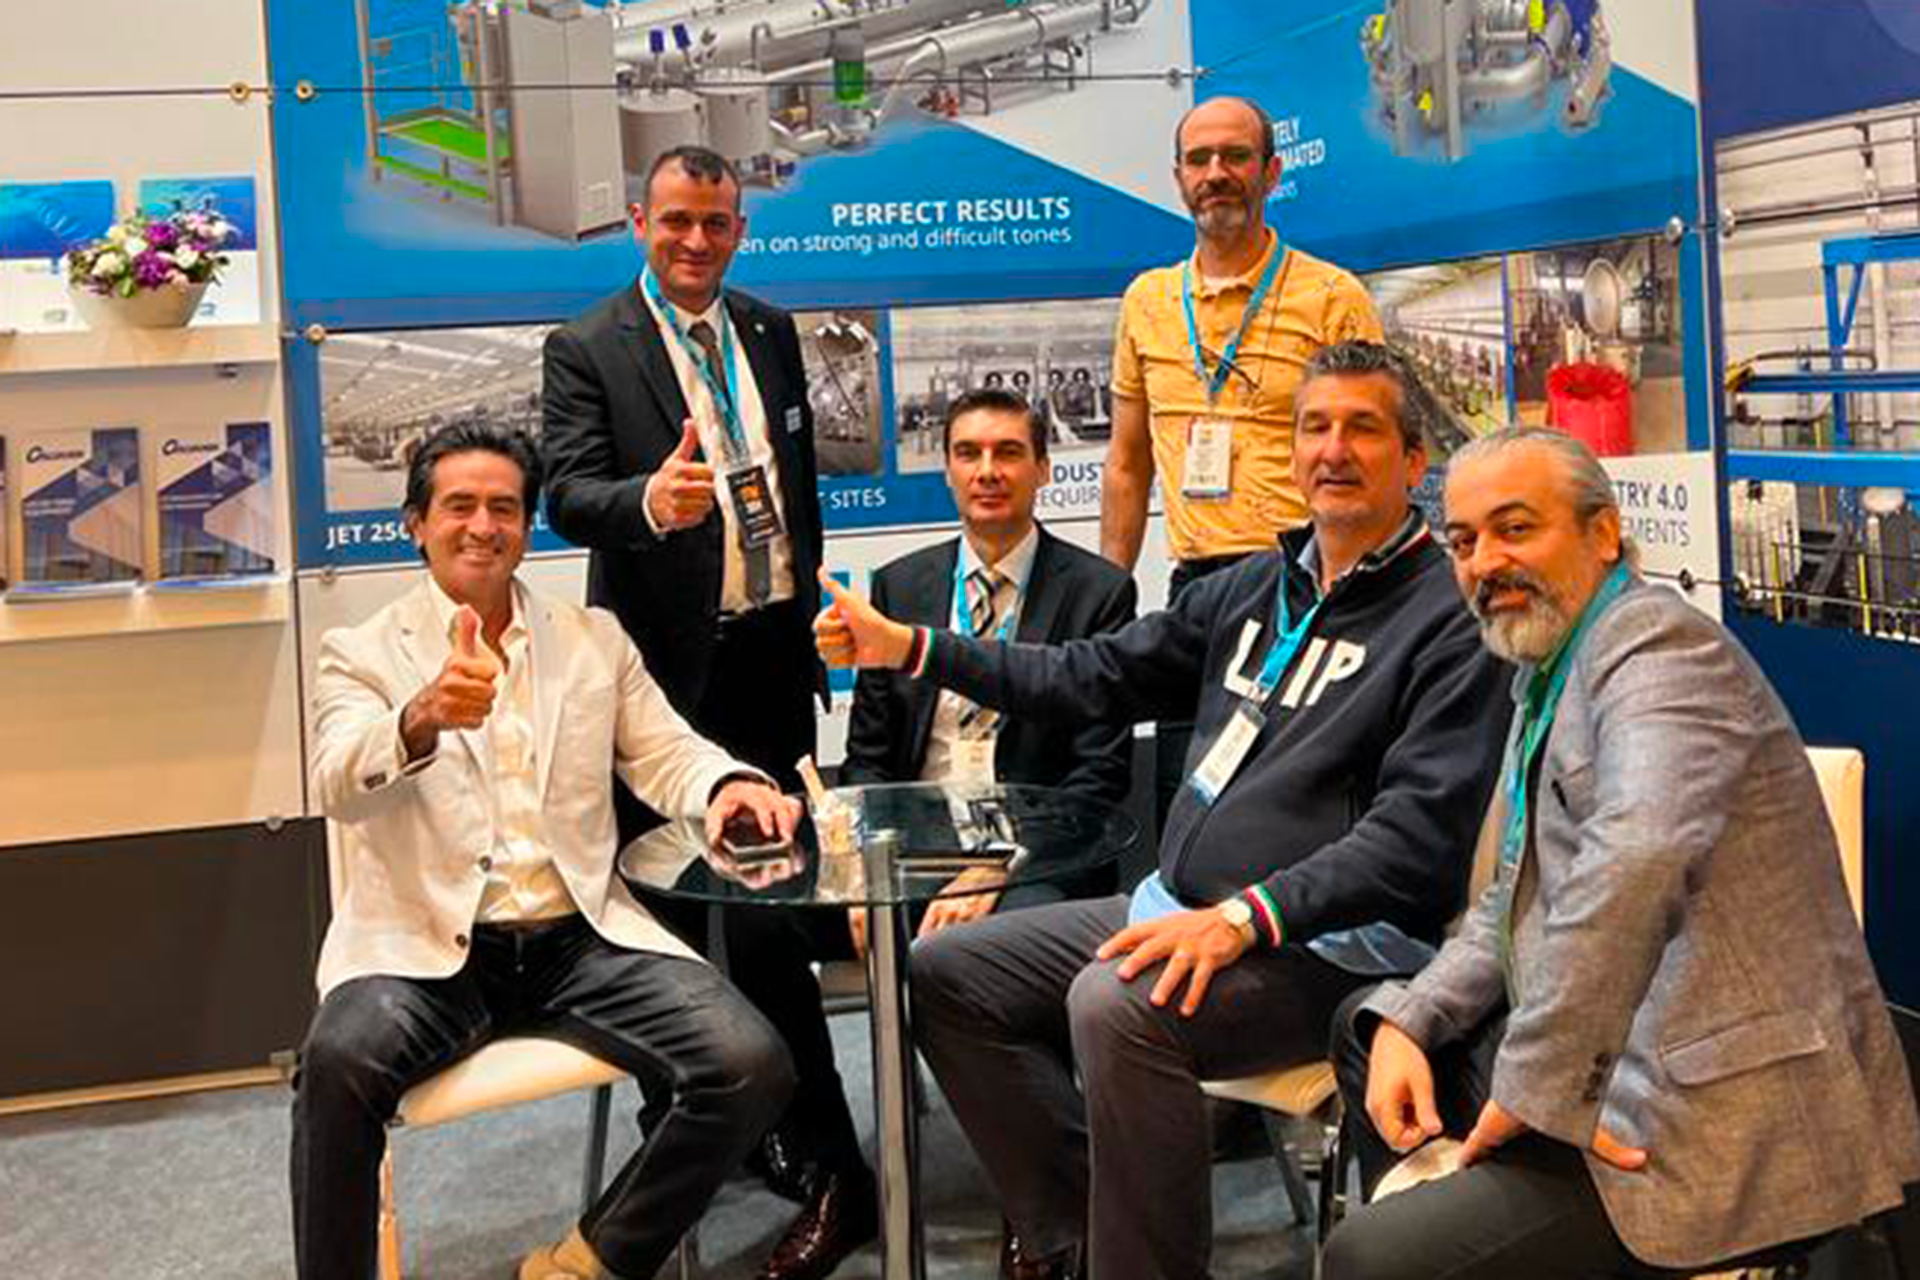 Great success for LAIP at ITM Turkey